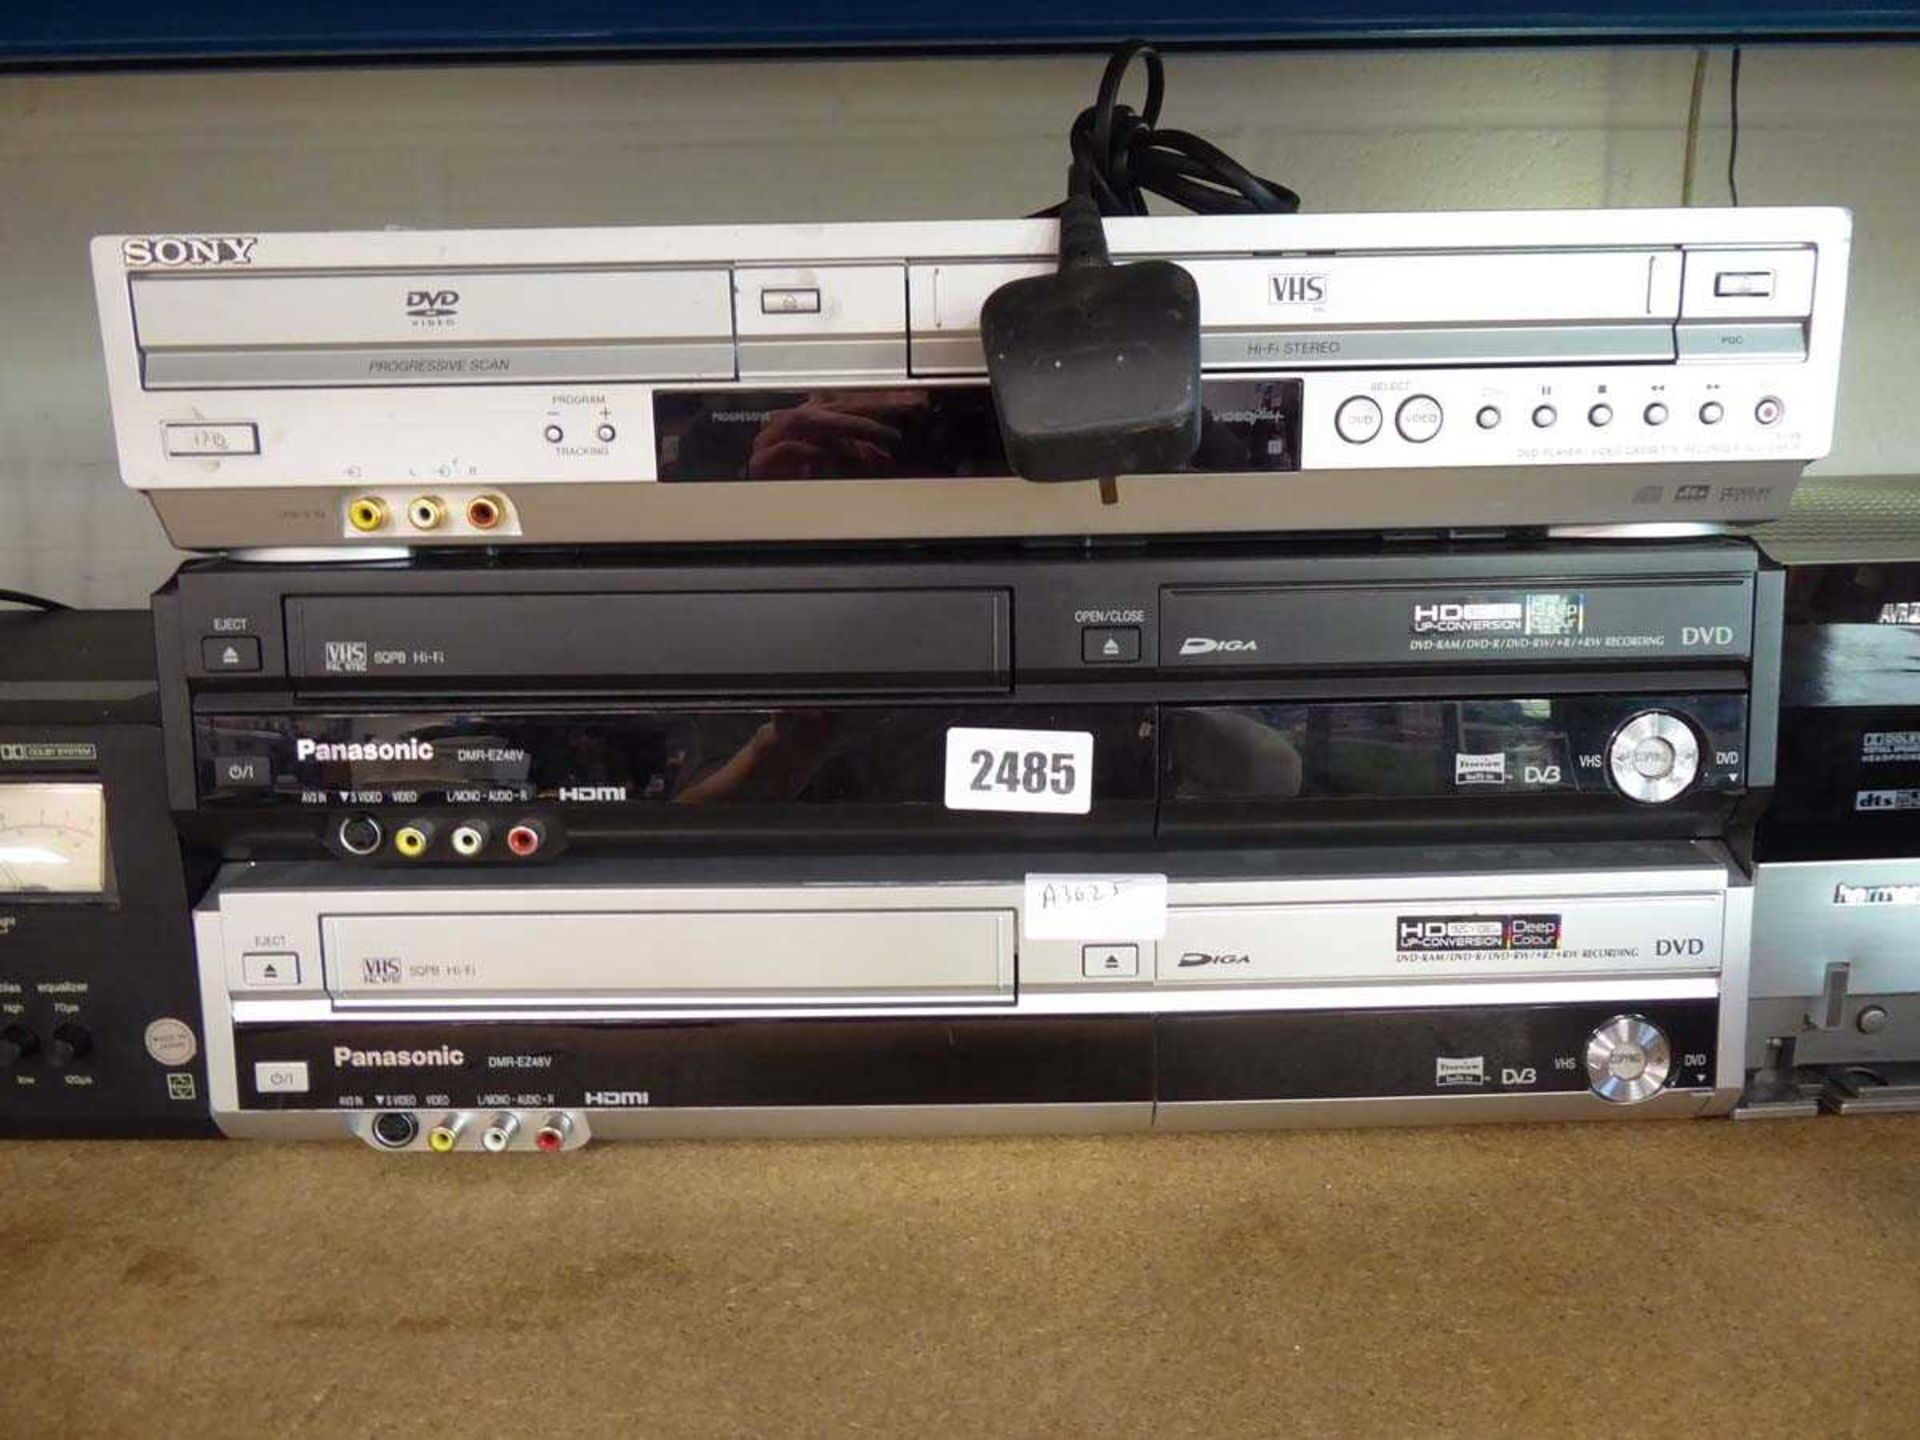 Sony DVD VHS player together with 2 Panasonic VHS DVD players